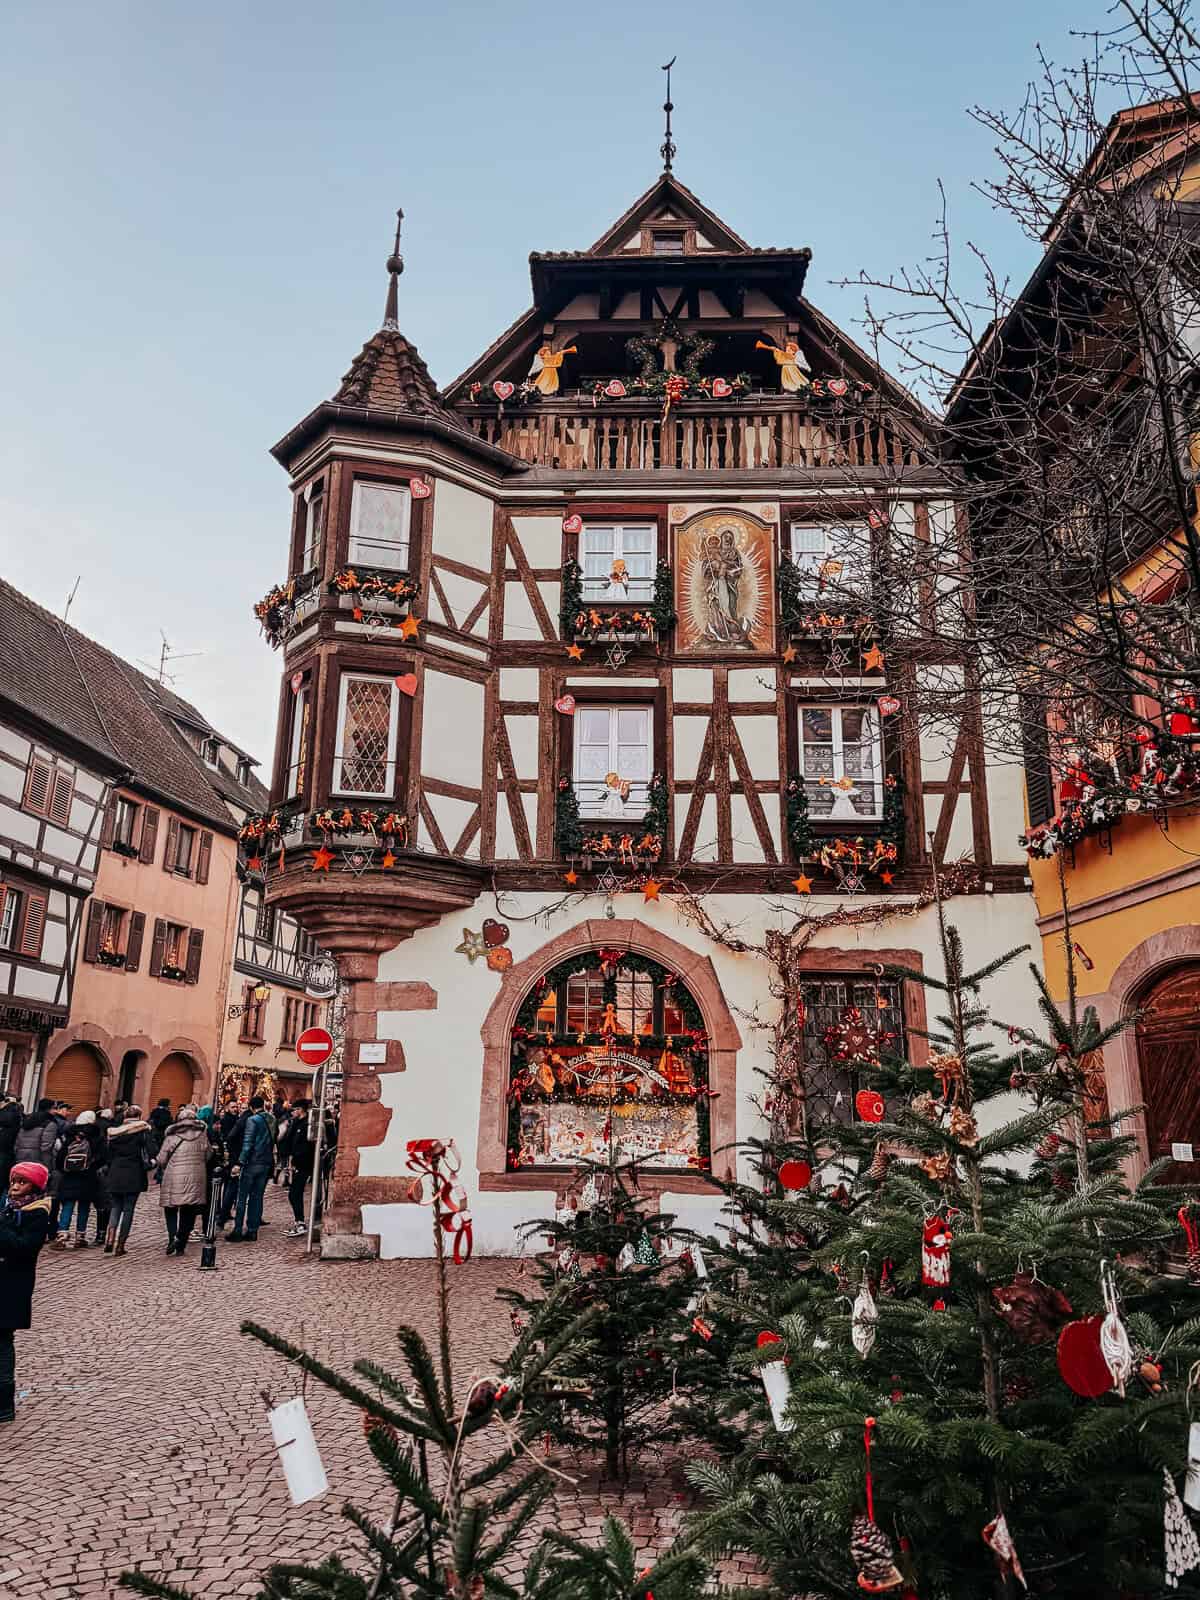 A beautifully decorated corner in Kaysersberg with a Christmas tree and festive ornaments, set against a historical half-timbered house with murals and wreaths.